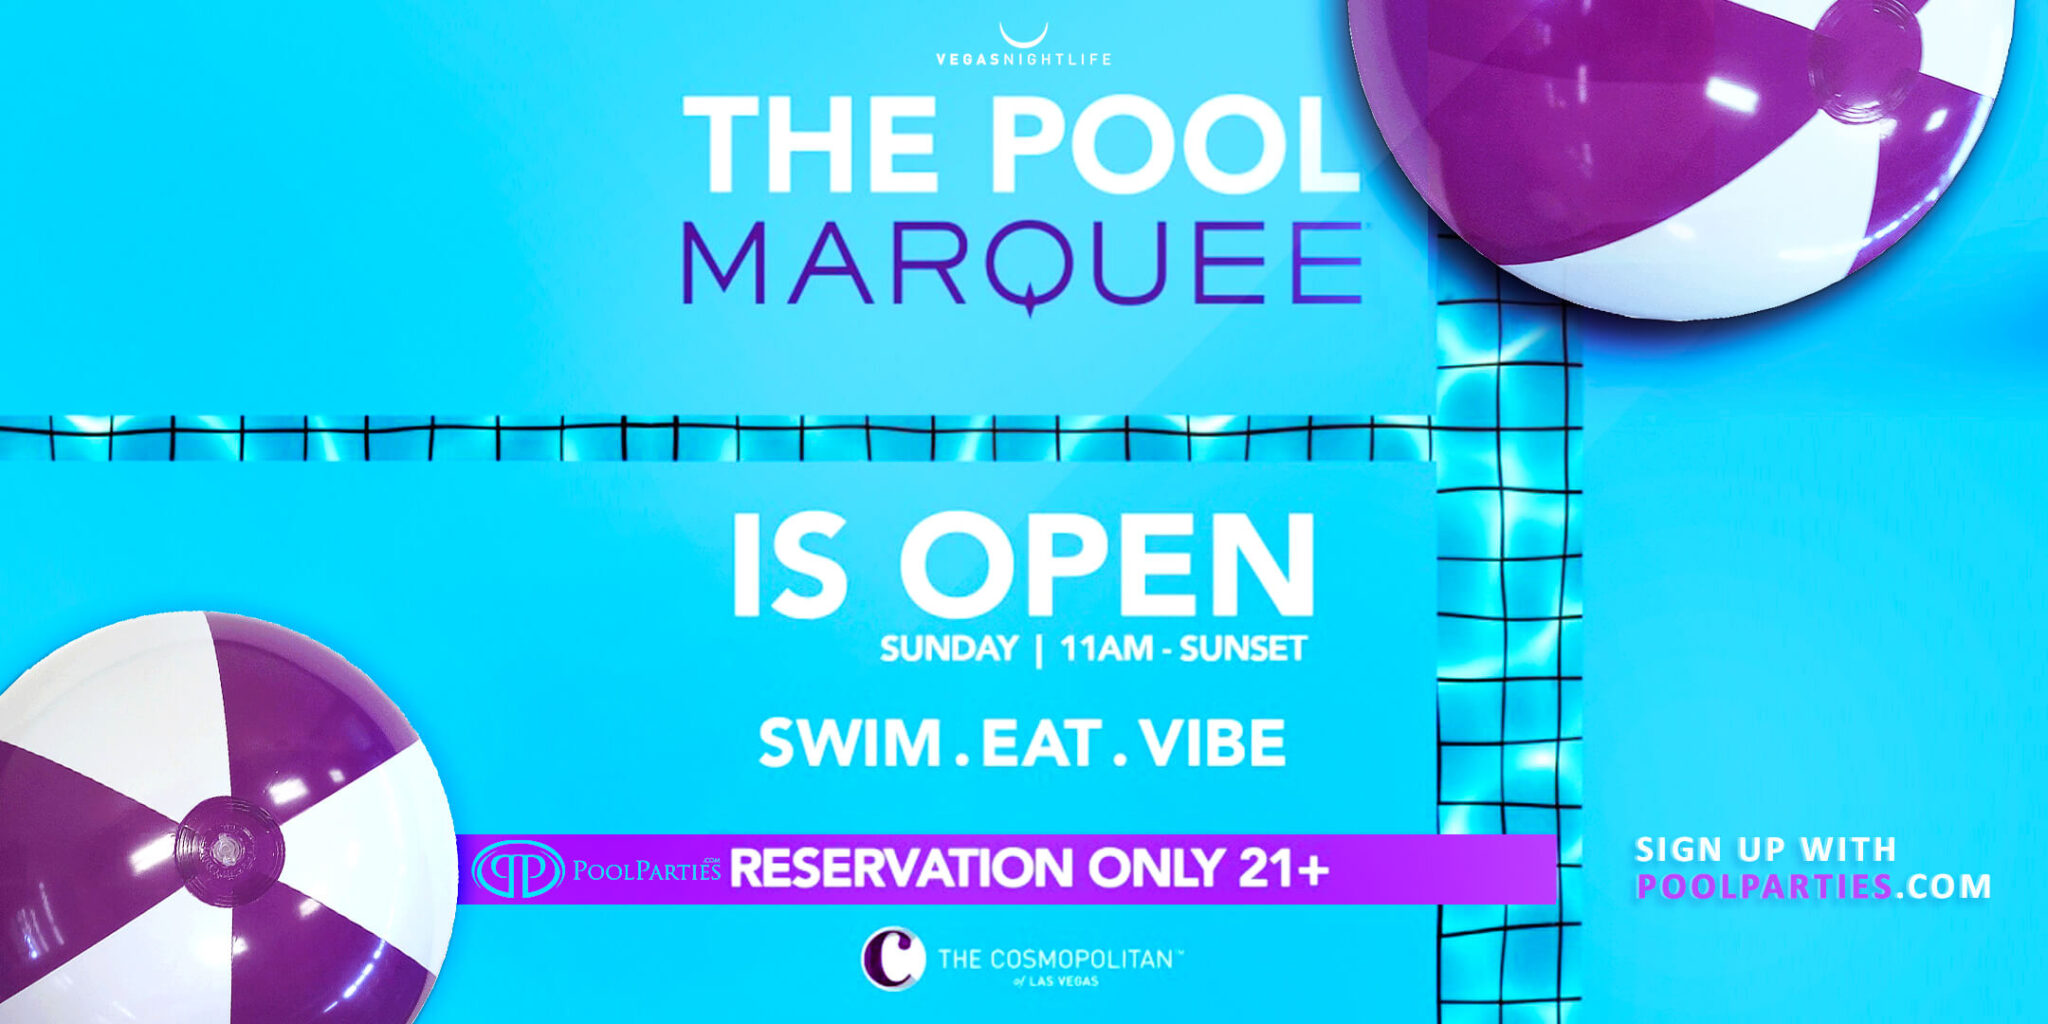 Memorial Day Sunday Marquee Vegas Pool Party VIP Nightlife